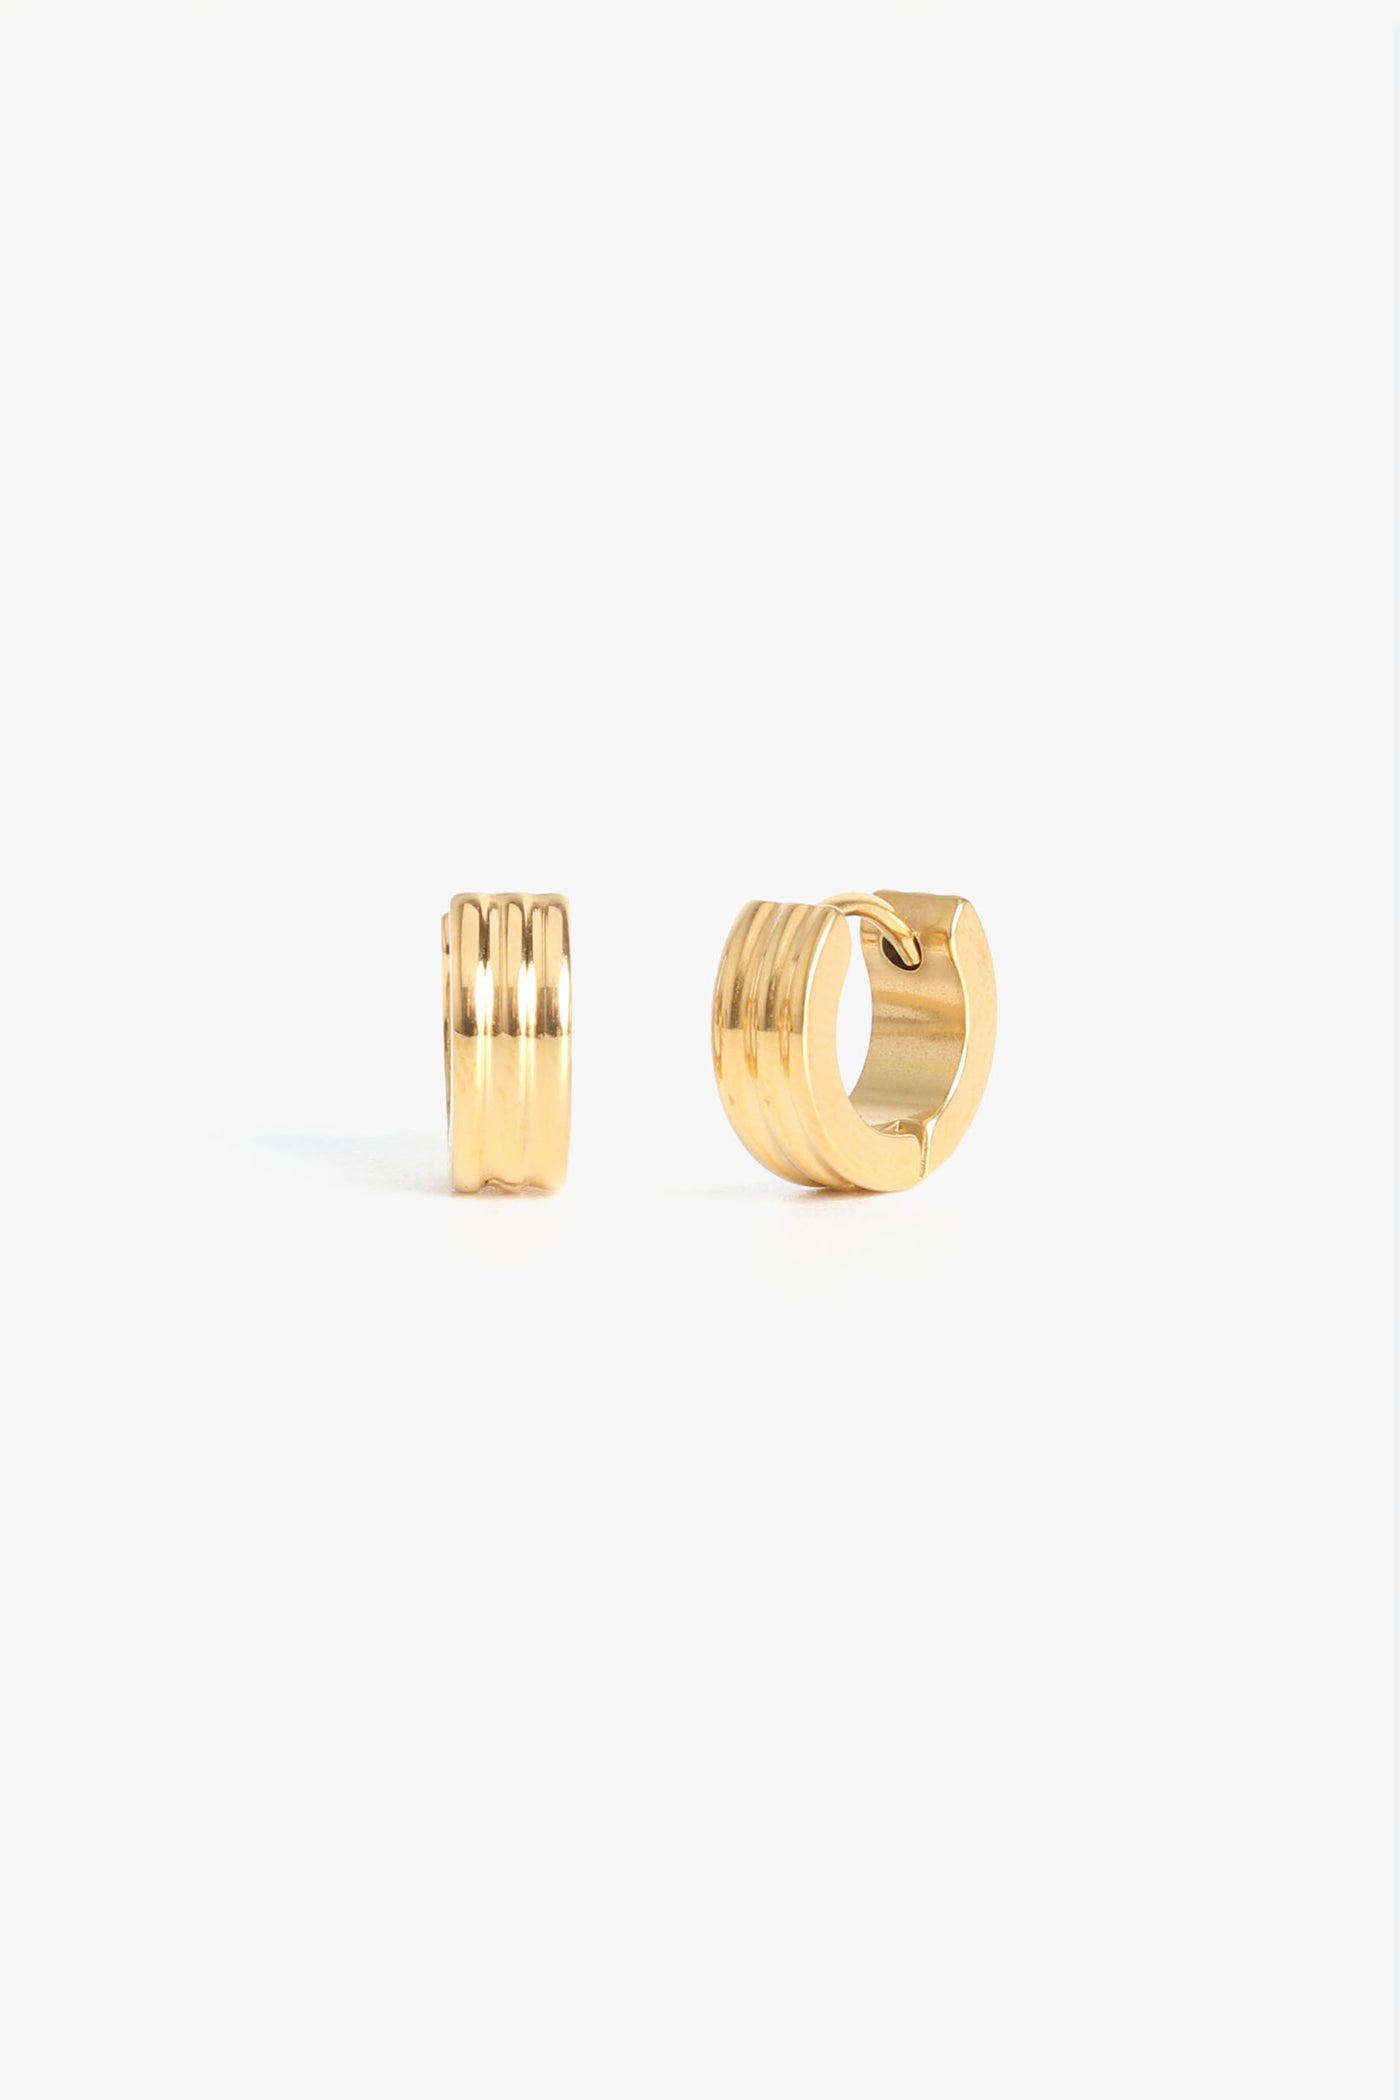 Marrin Costello Jewelry Evelyn 3mm Huggies ribbed small hoops with click tension hinge closure— for pierced ears. Waterproof, sustainable, hypoallergenic. 14k gold plated stainless steel.